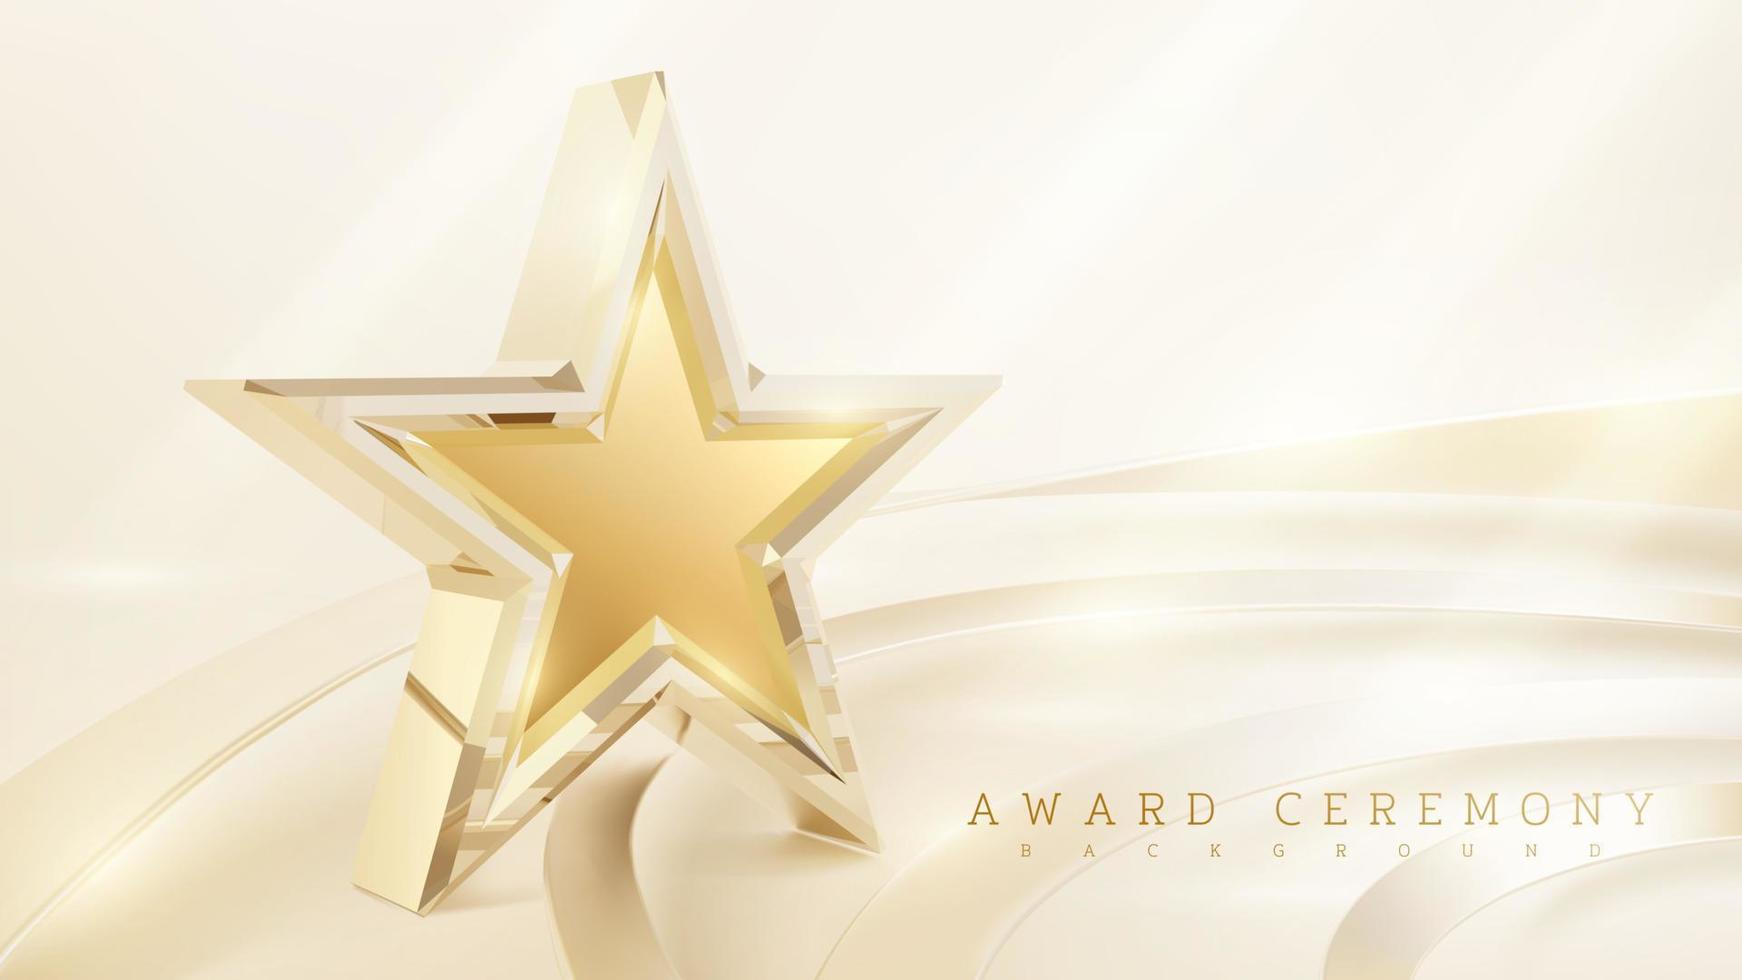 Award ceremony background with 3d gold star and ribbon element and glitter light effect decoration. vector